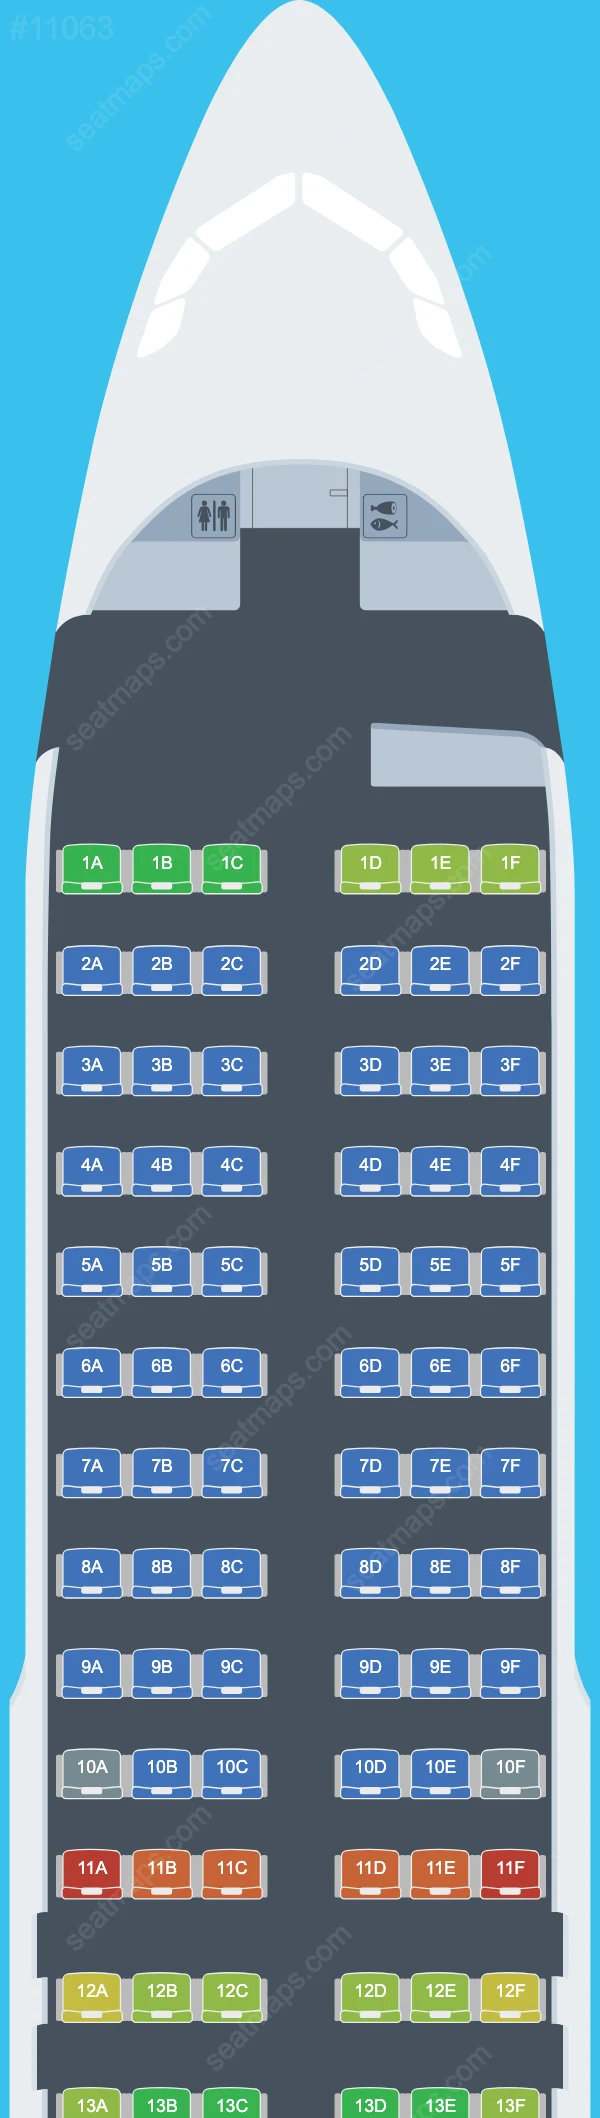 Avianca Airbus A320 Seat Maps A320-200 V.5